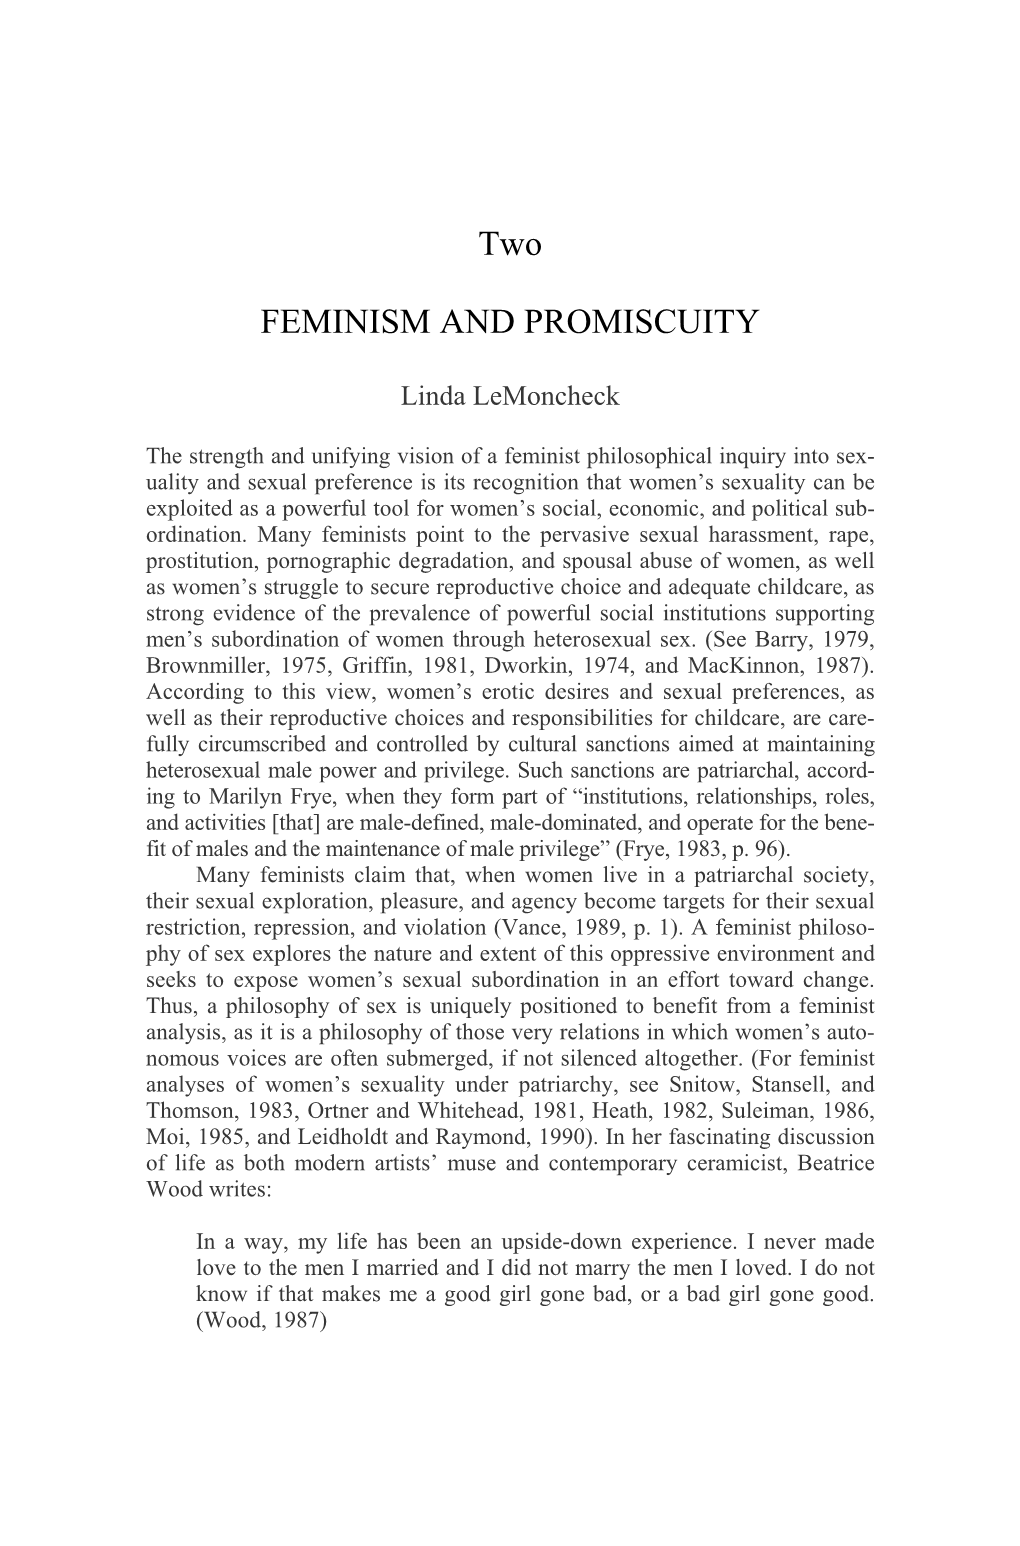 Two FEMINISM and PROMISCUITY